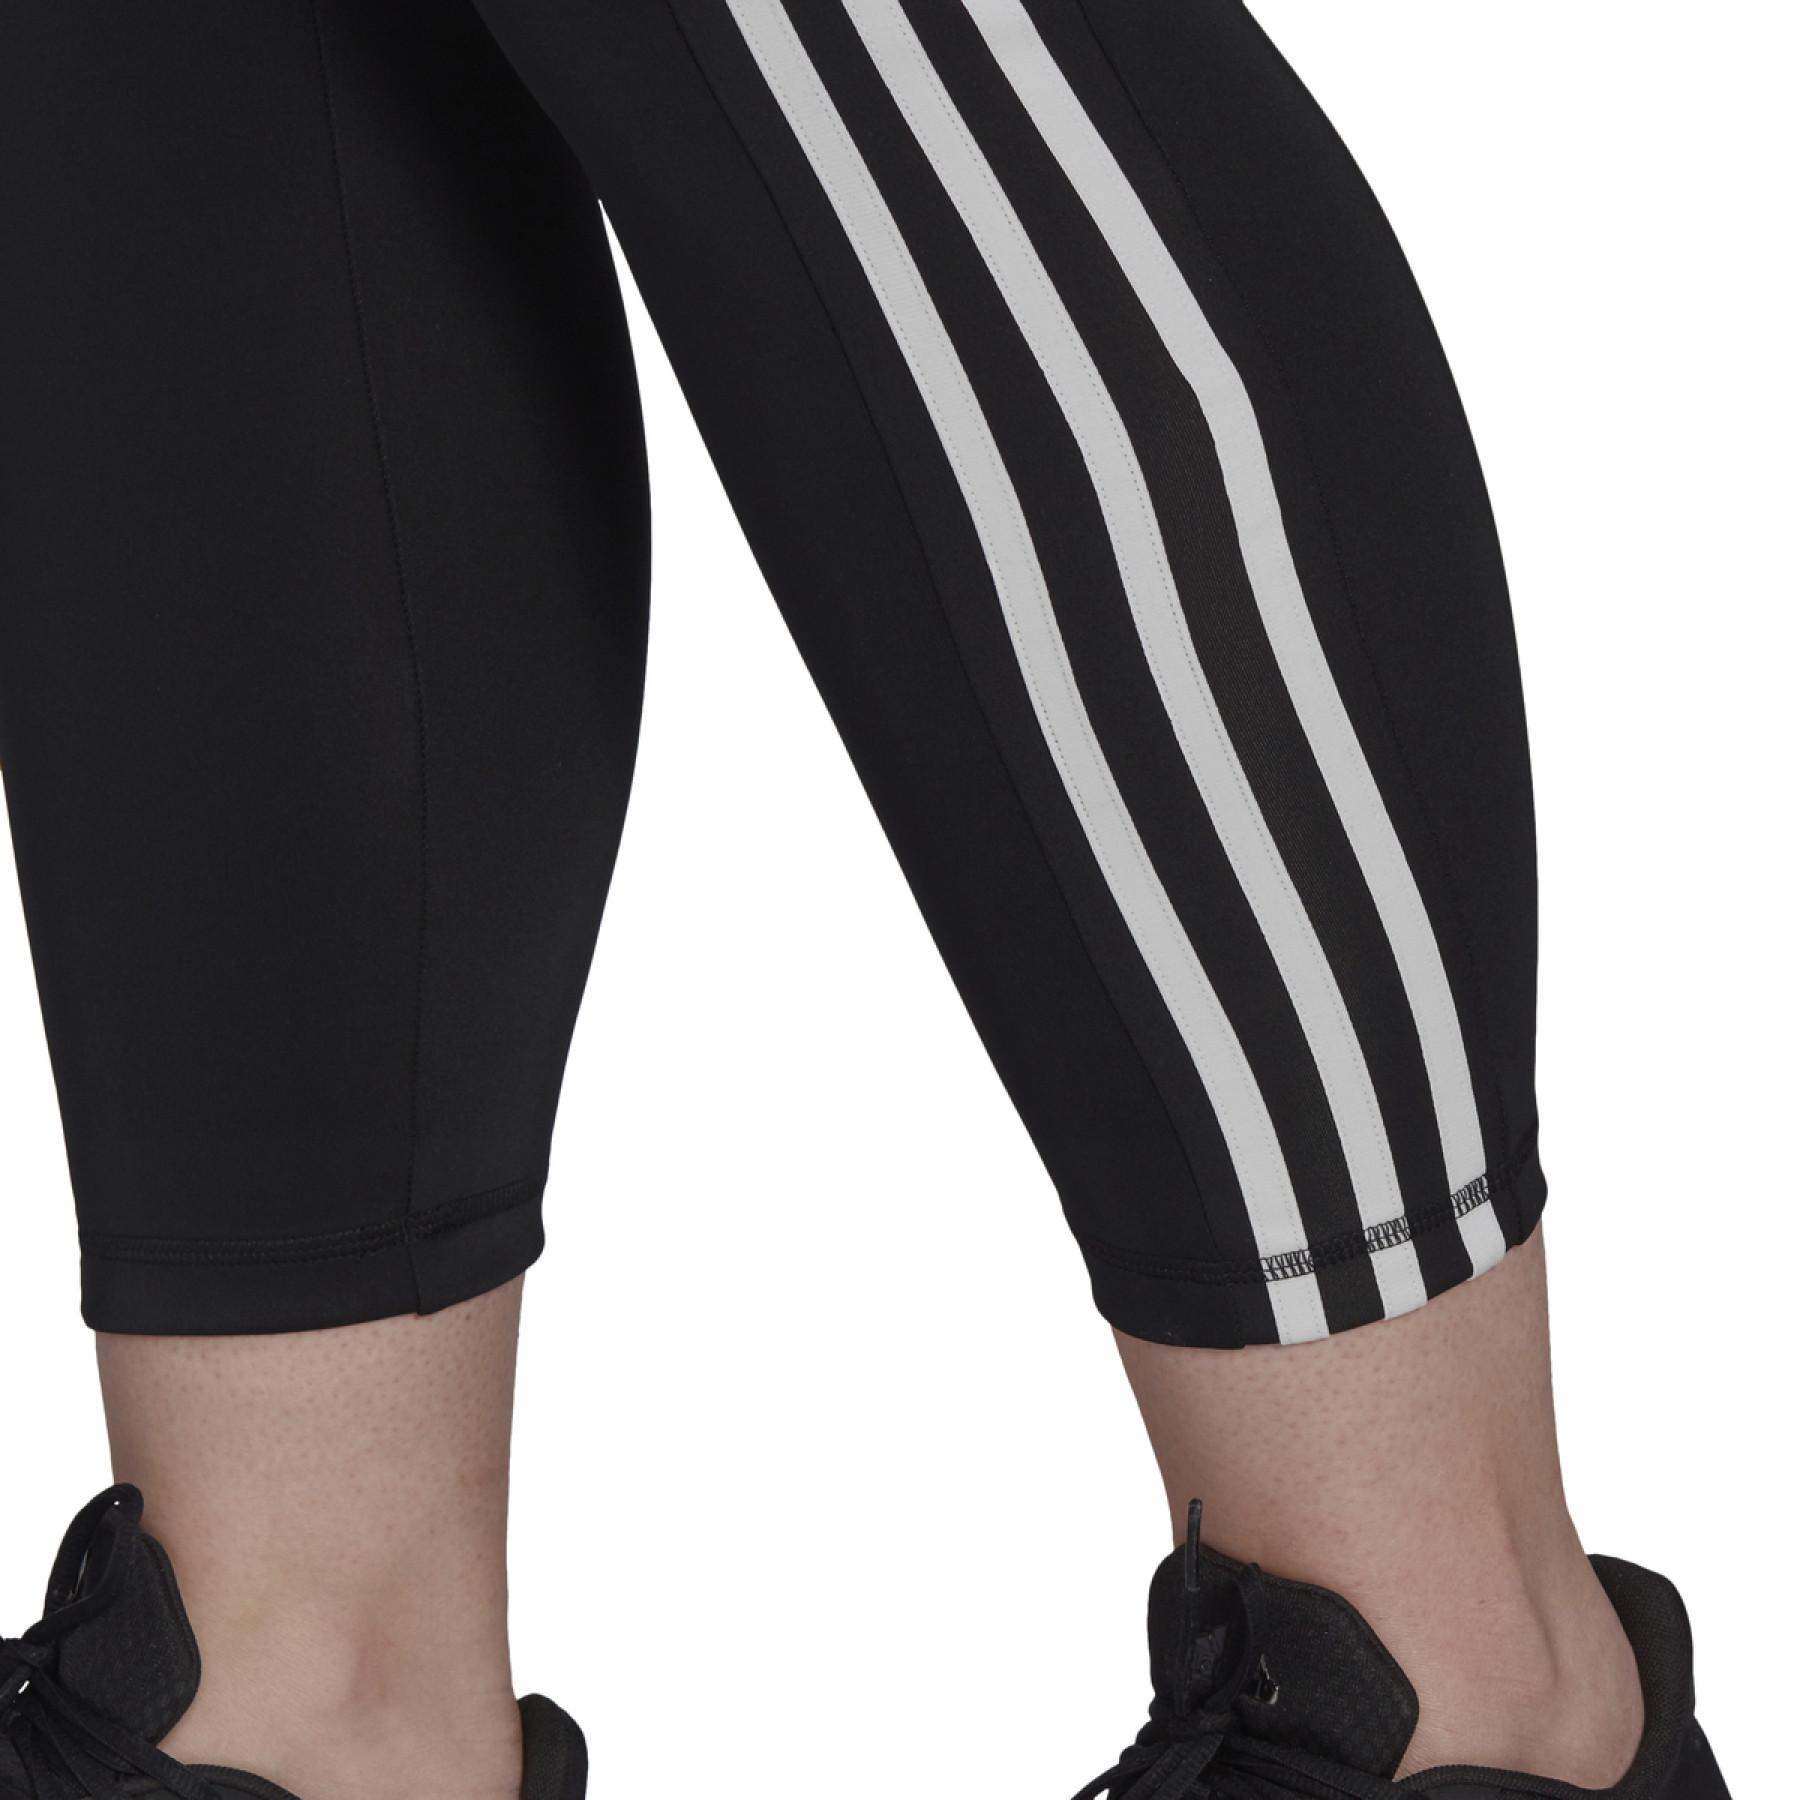 Women's high-waisted leggings adidas 3-Bandes 7/8 Grande Taille